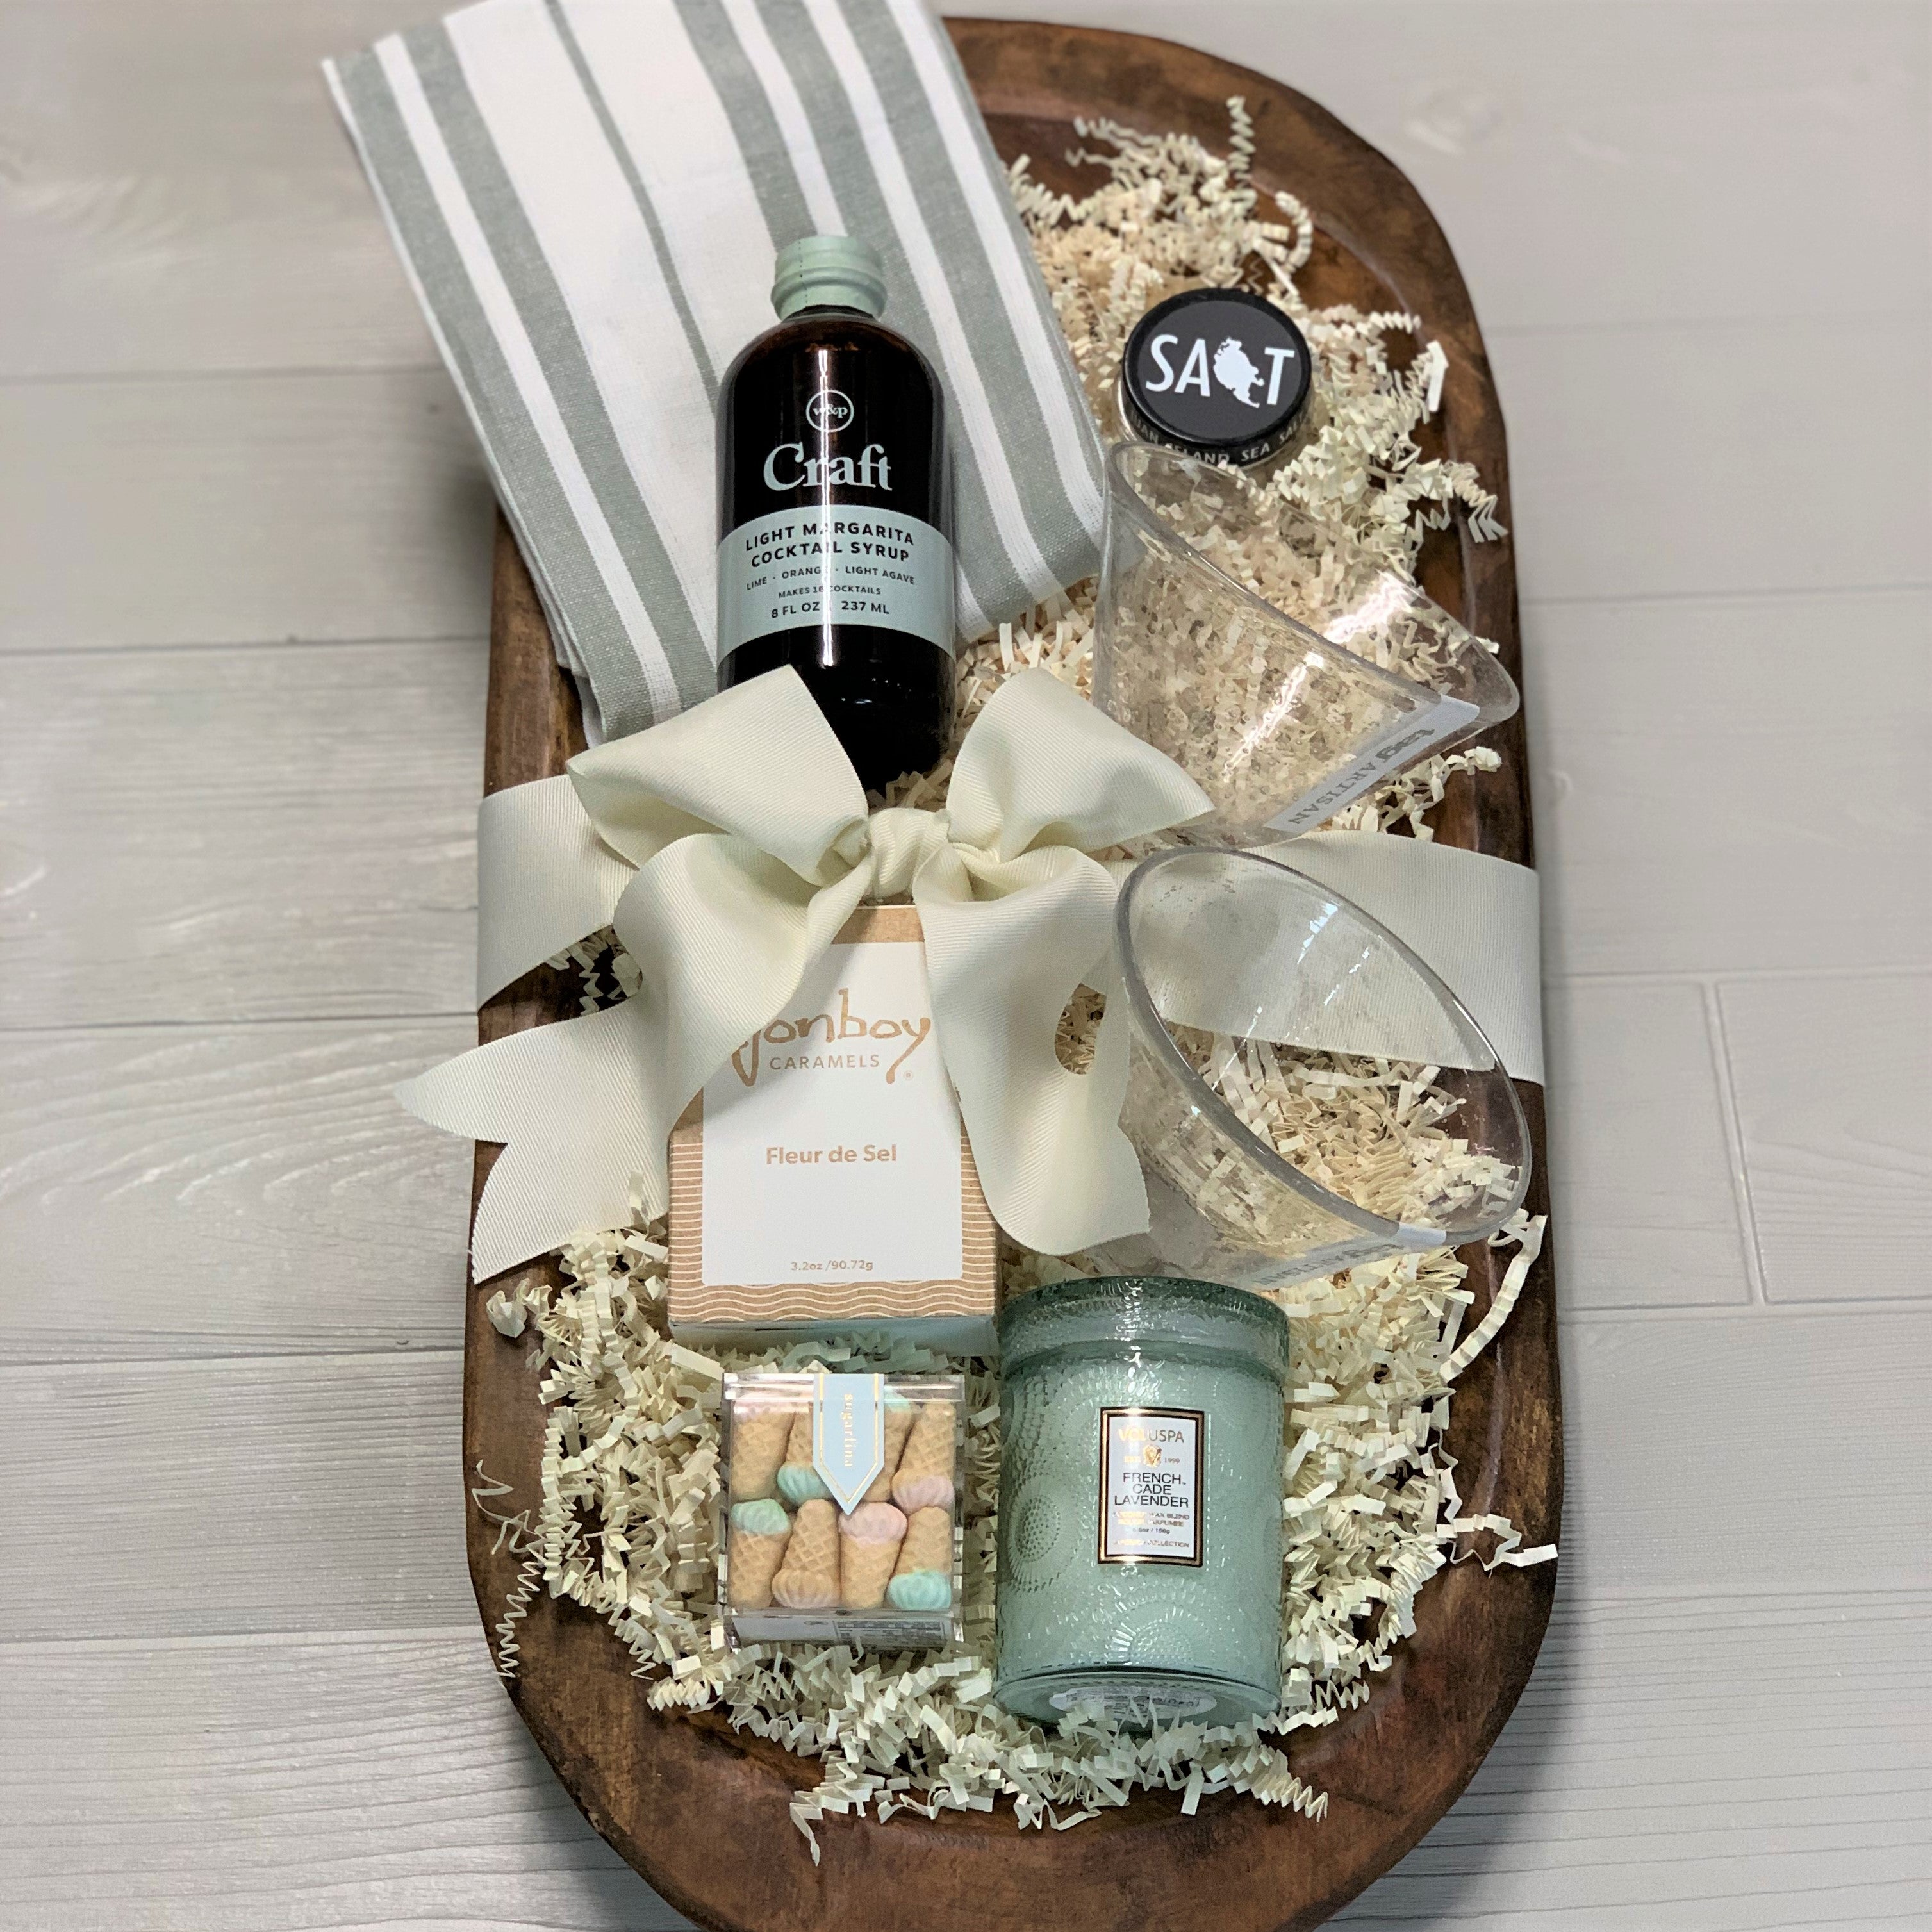 a margarita kit gift basket that includes a kitchen towel, margarita syrup, 2 glasses, caramel, Sugarfina gummy bears, sea salt, Voluspa candle, packaged in a wooden bowl.